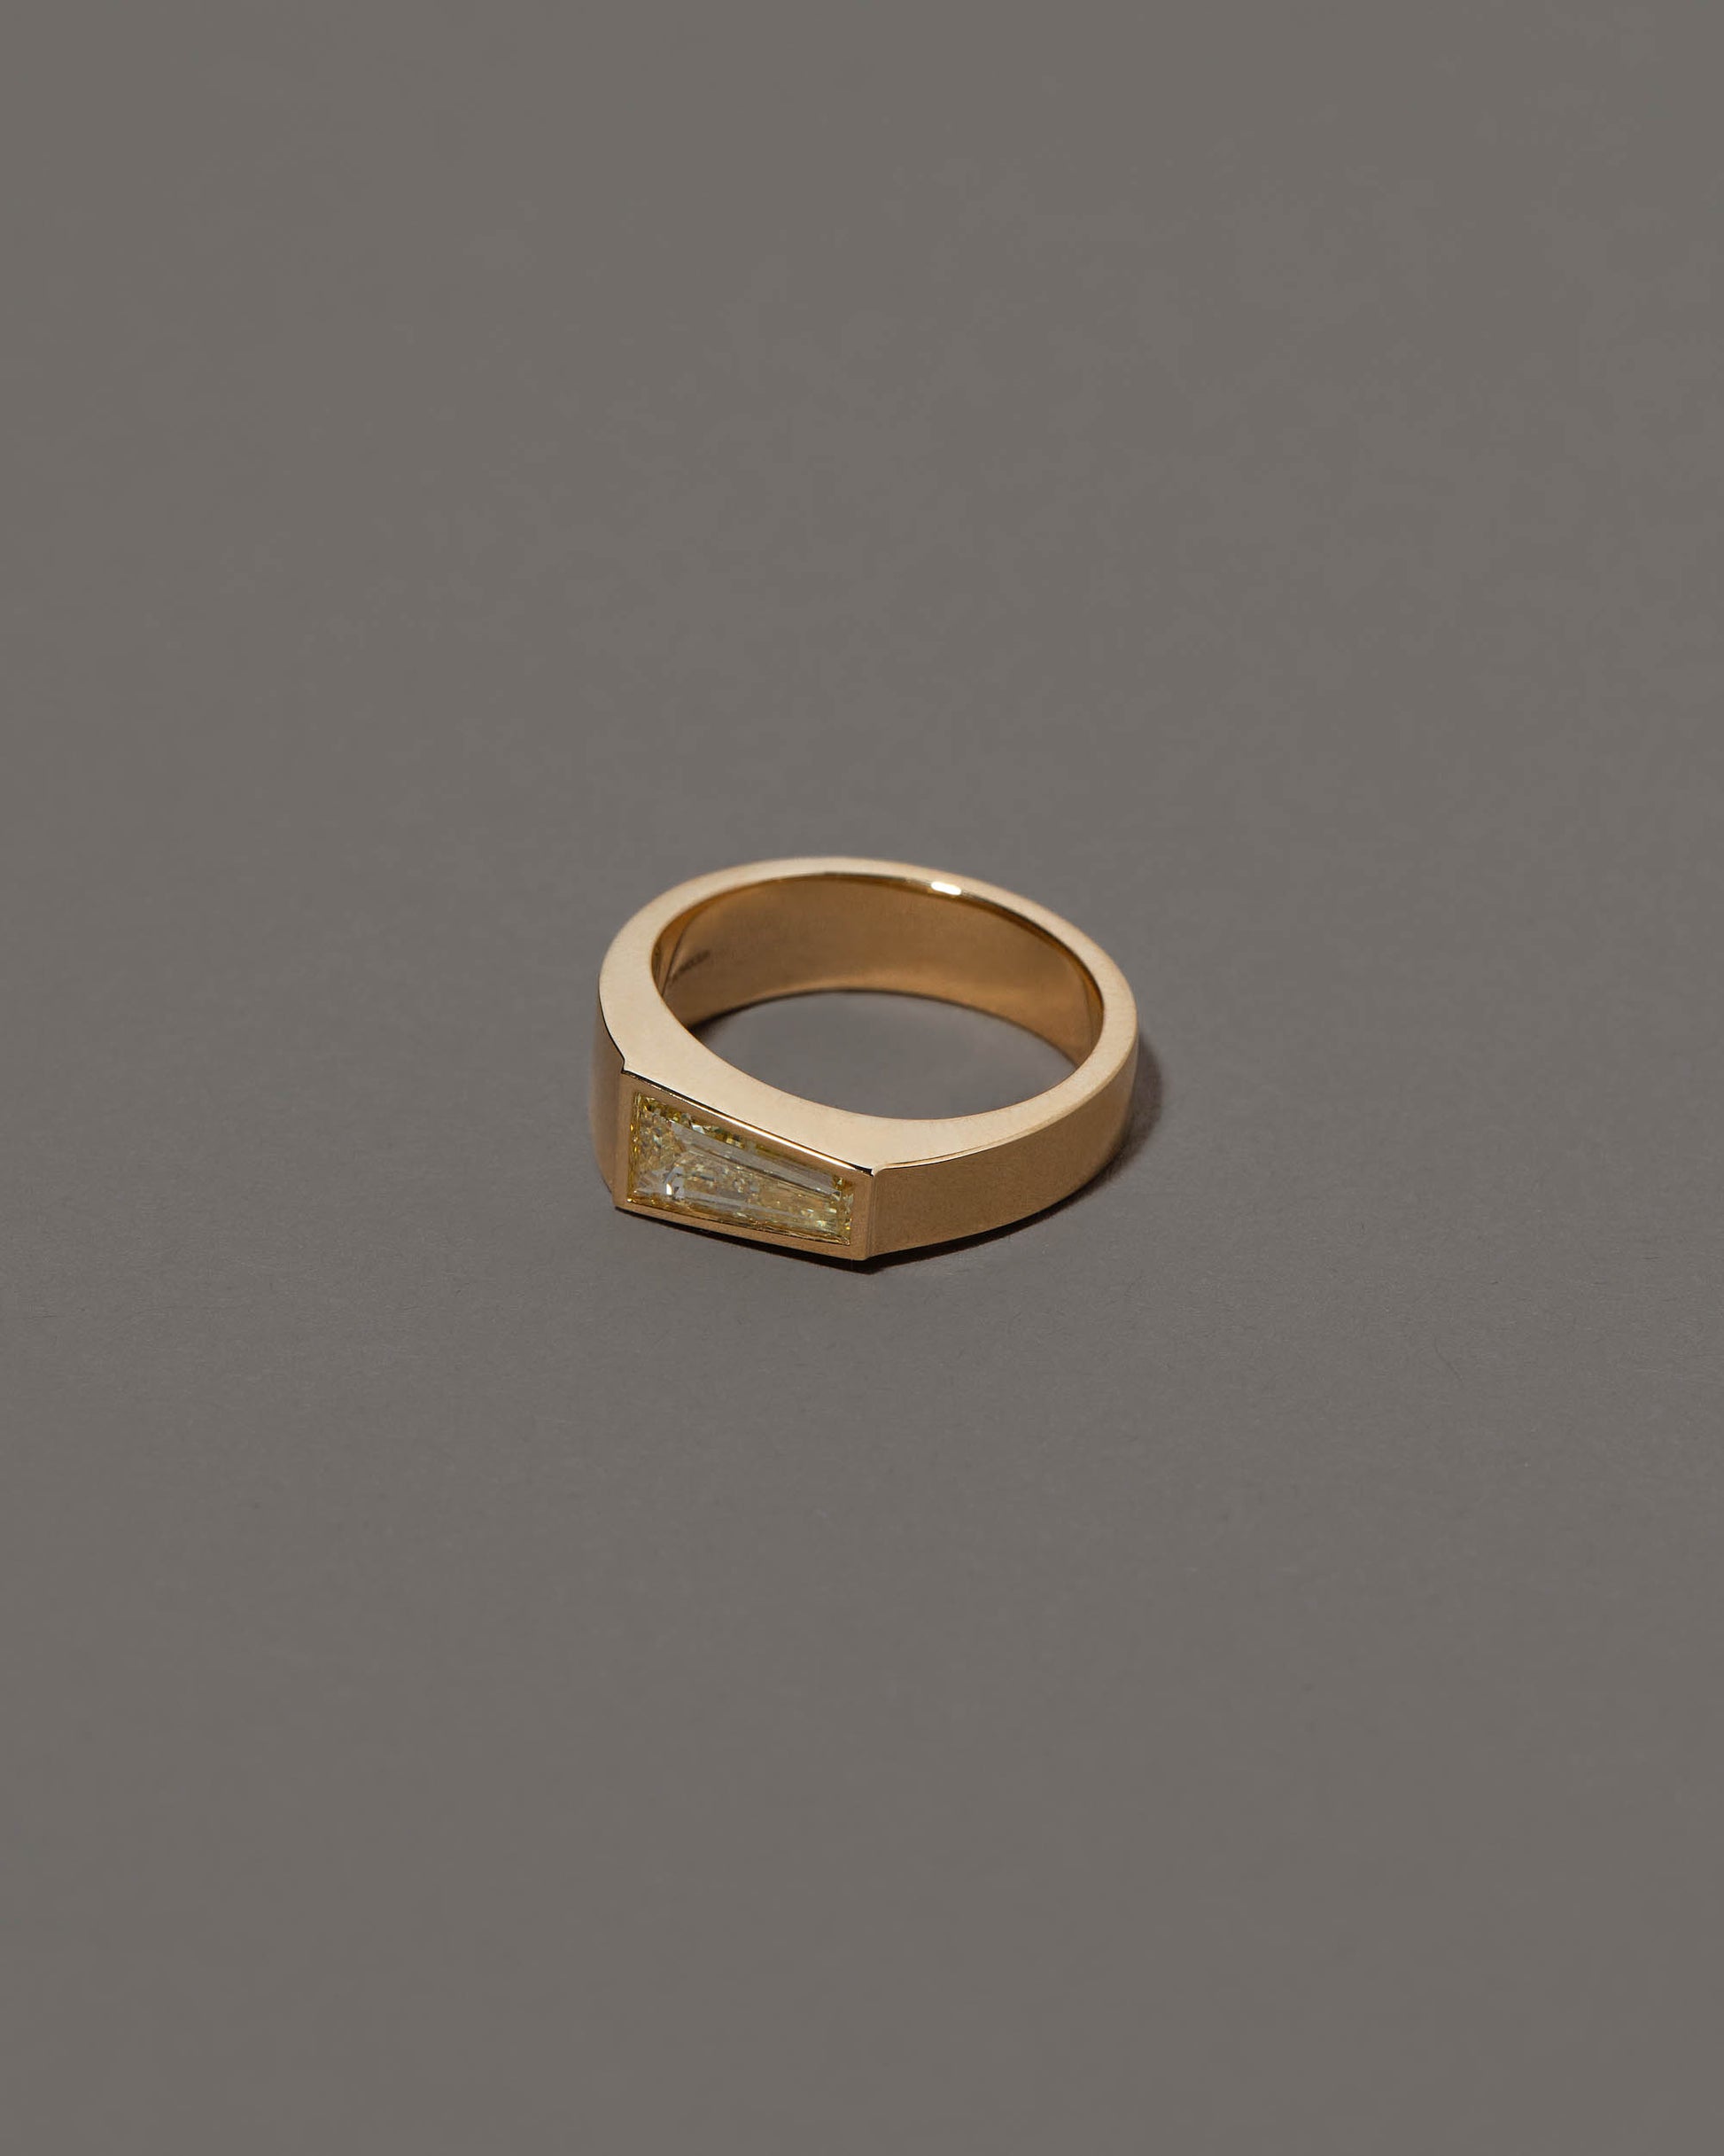 View from the side of the Joviality Ring on grey color background.